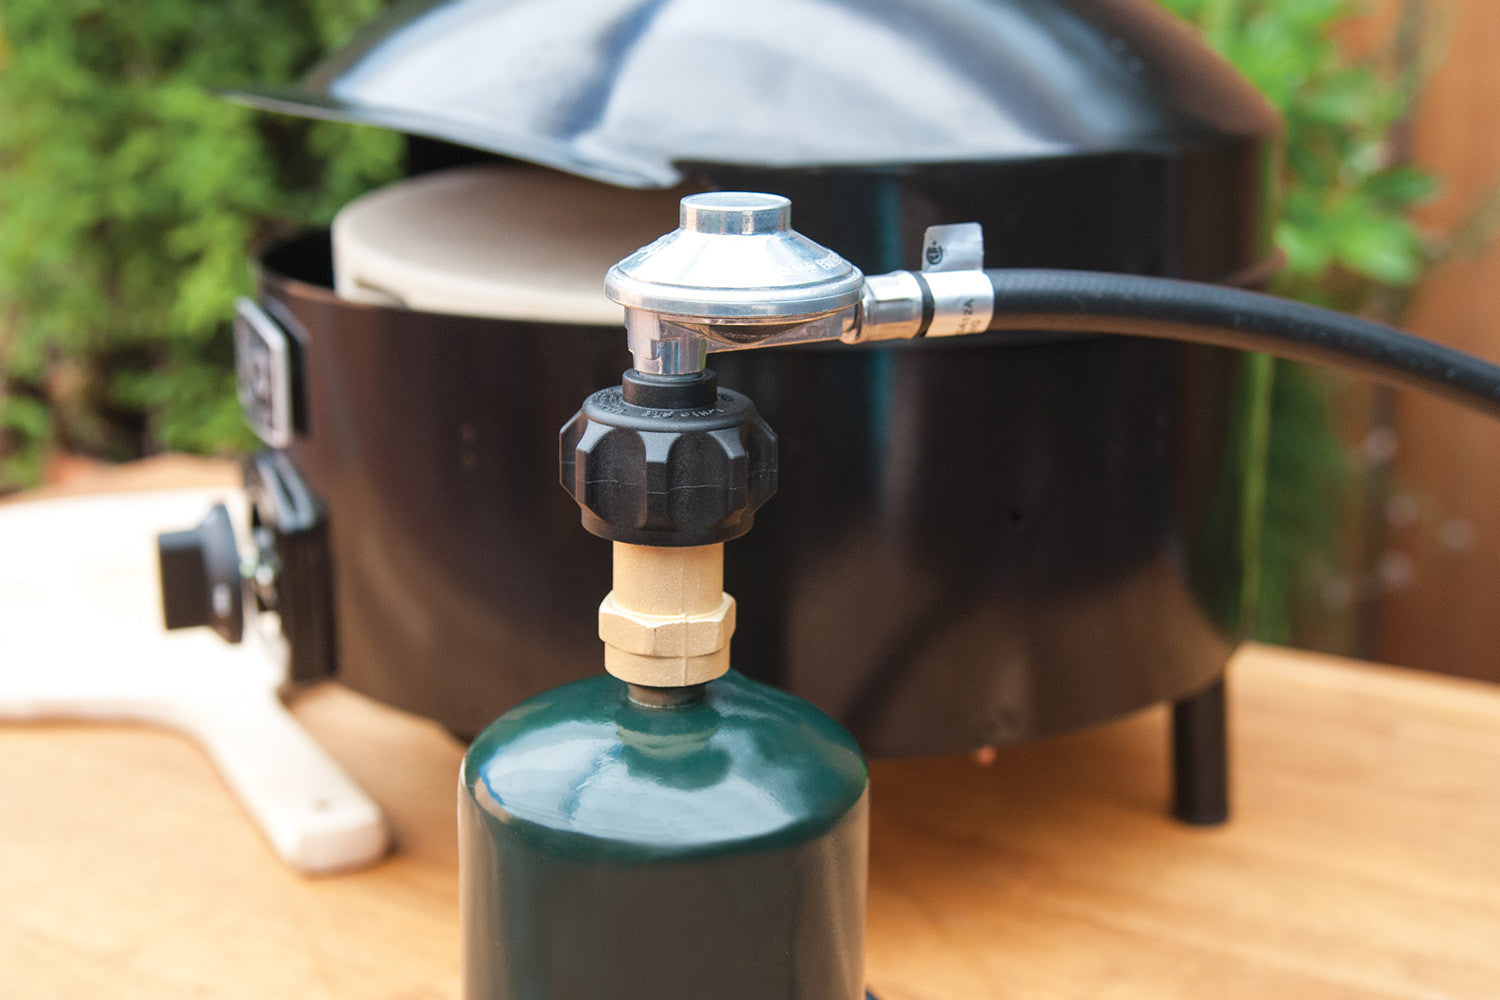 Using the Pizza Oven Adapter with a 1 lb. Propane Tank